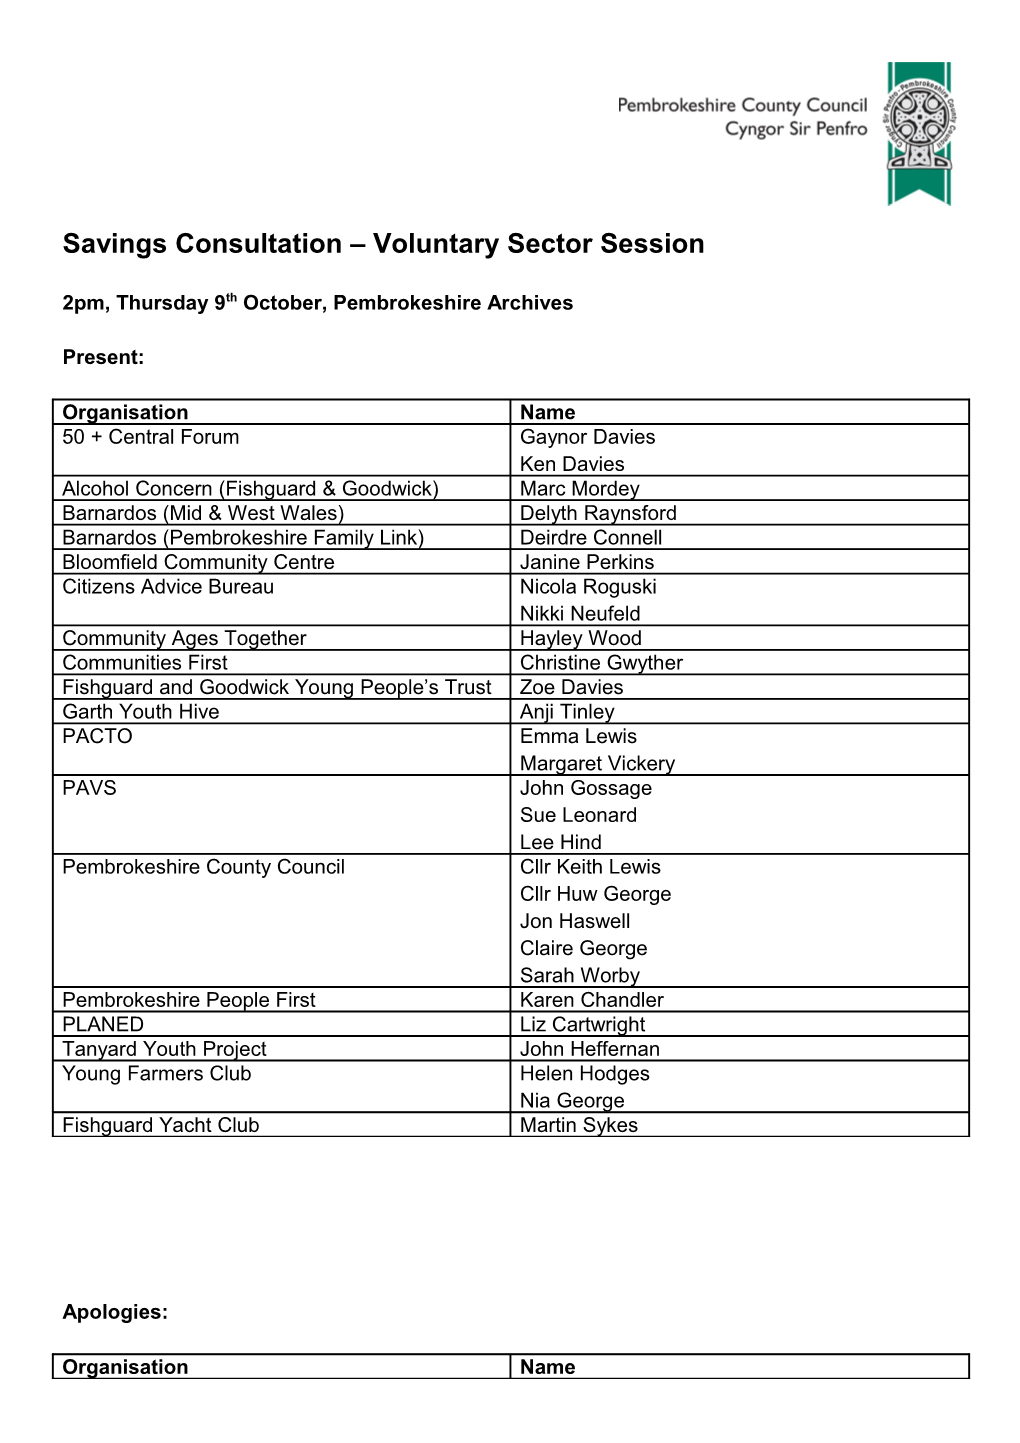 Savings Consultation Voluntary Sector Session